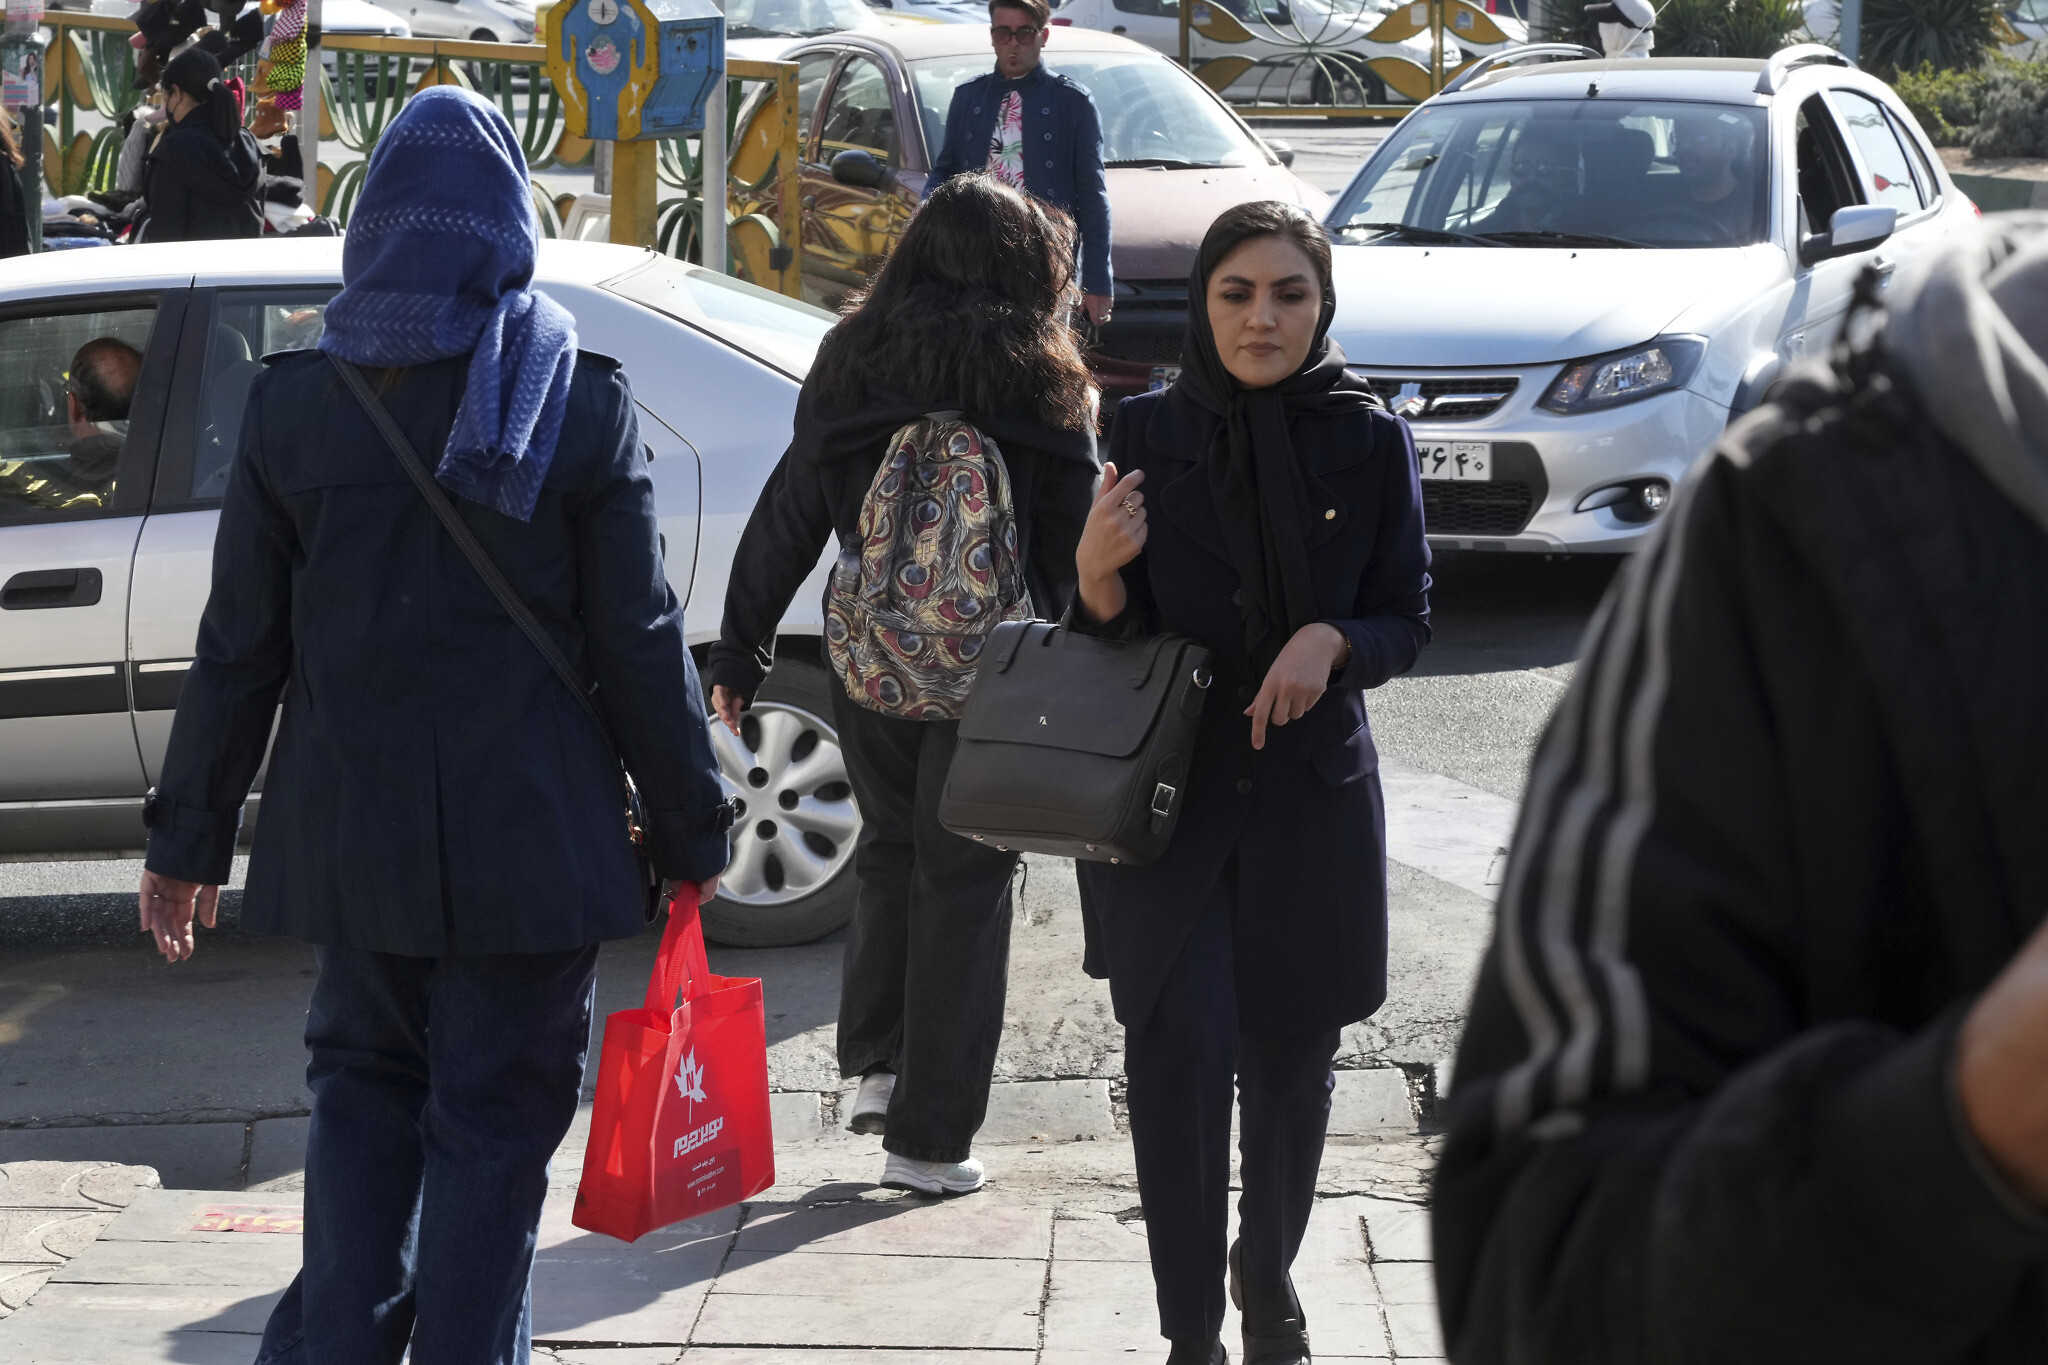 The Iran Charges Two Prominent Actresses for Not Wearing Headscarves.